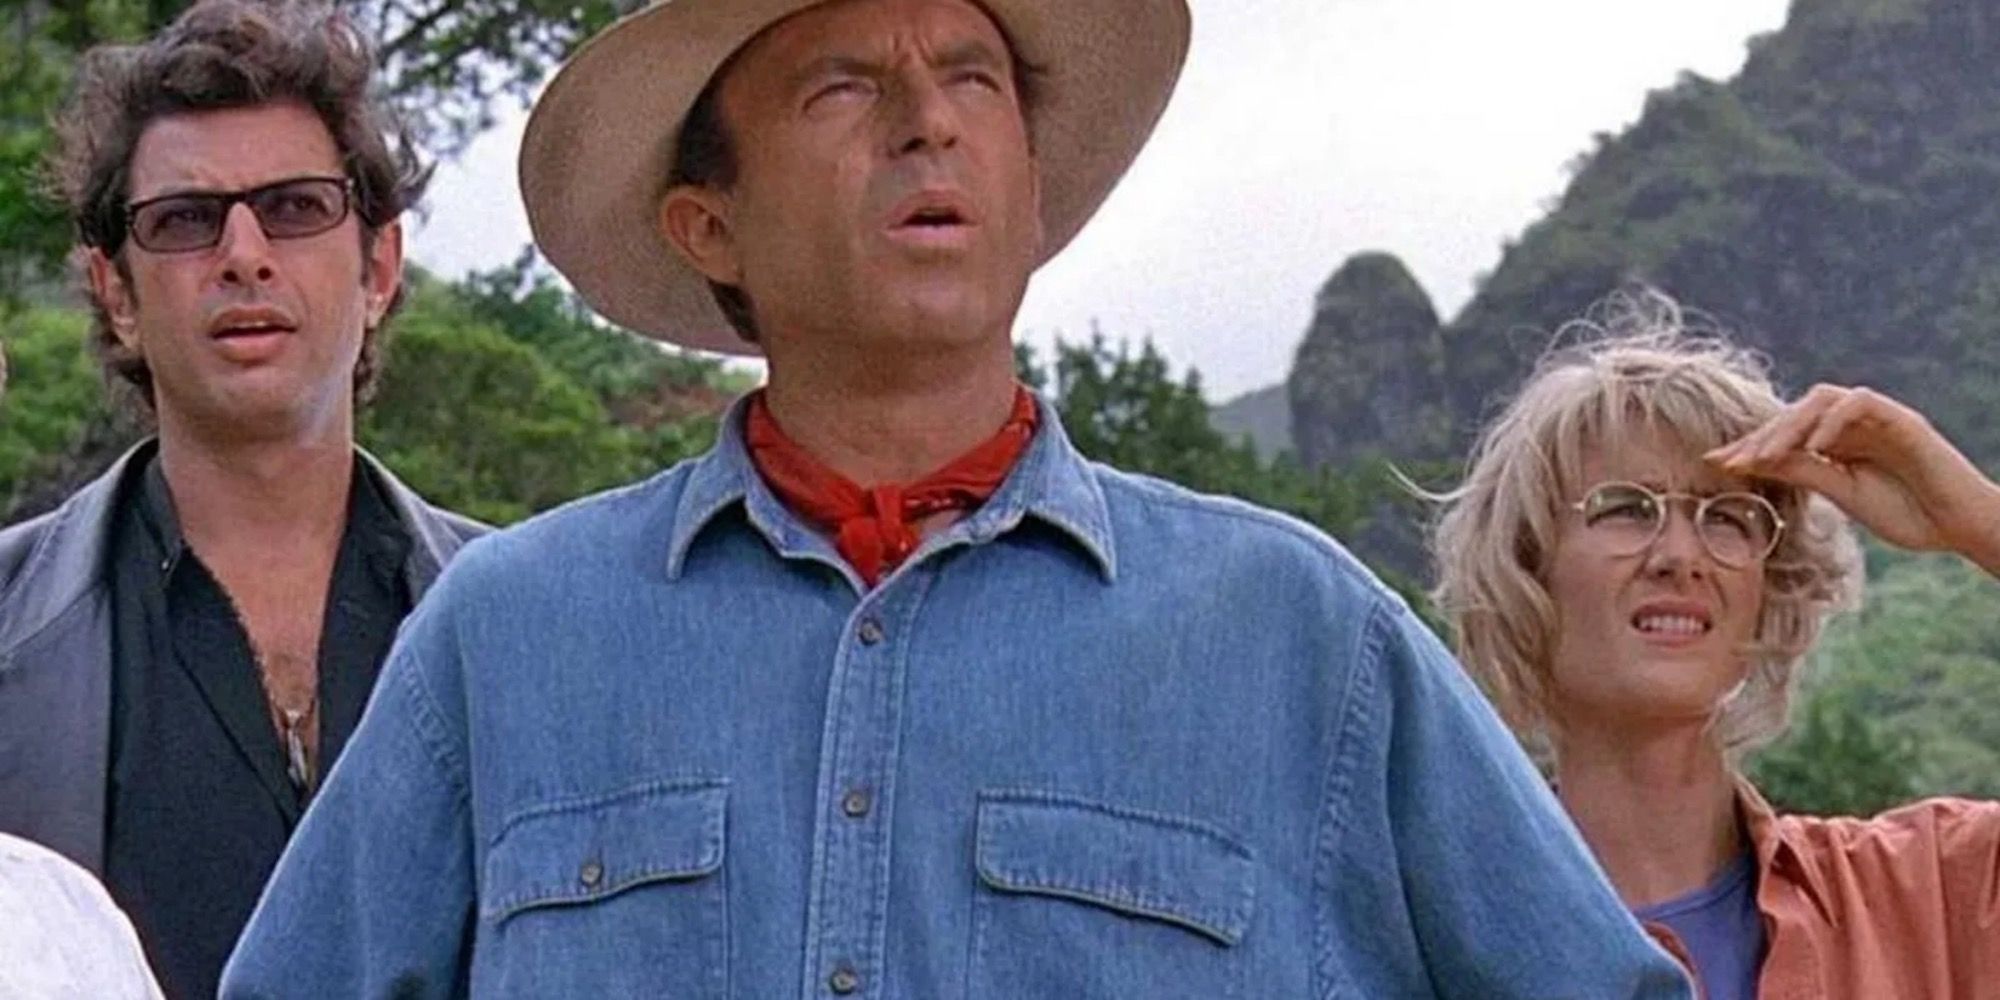 A scene featuring characters in Jurassic Park